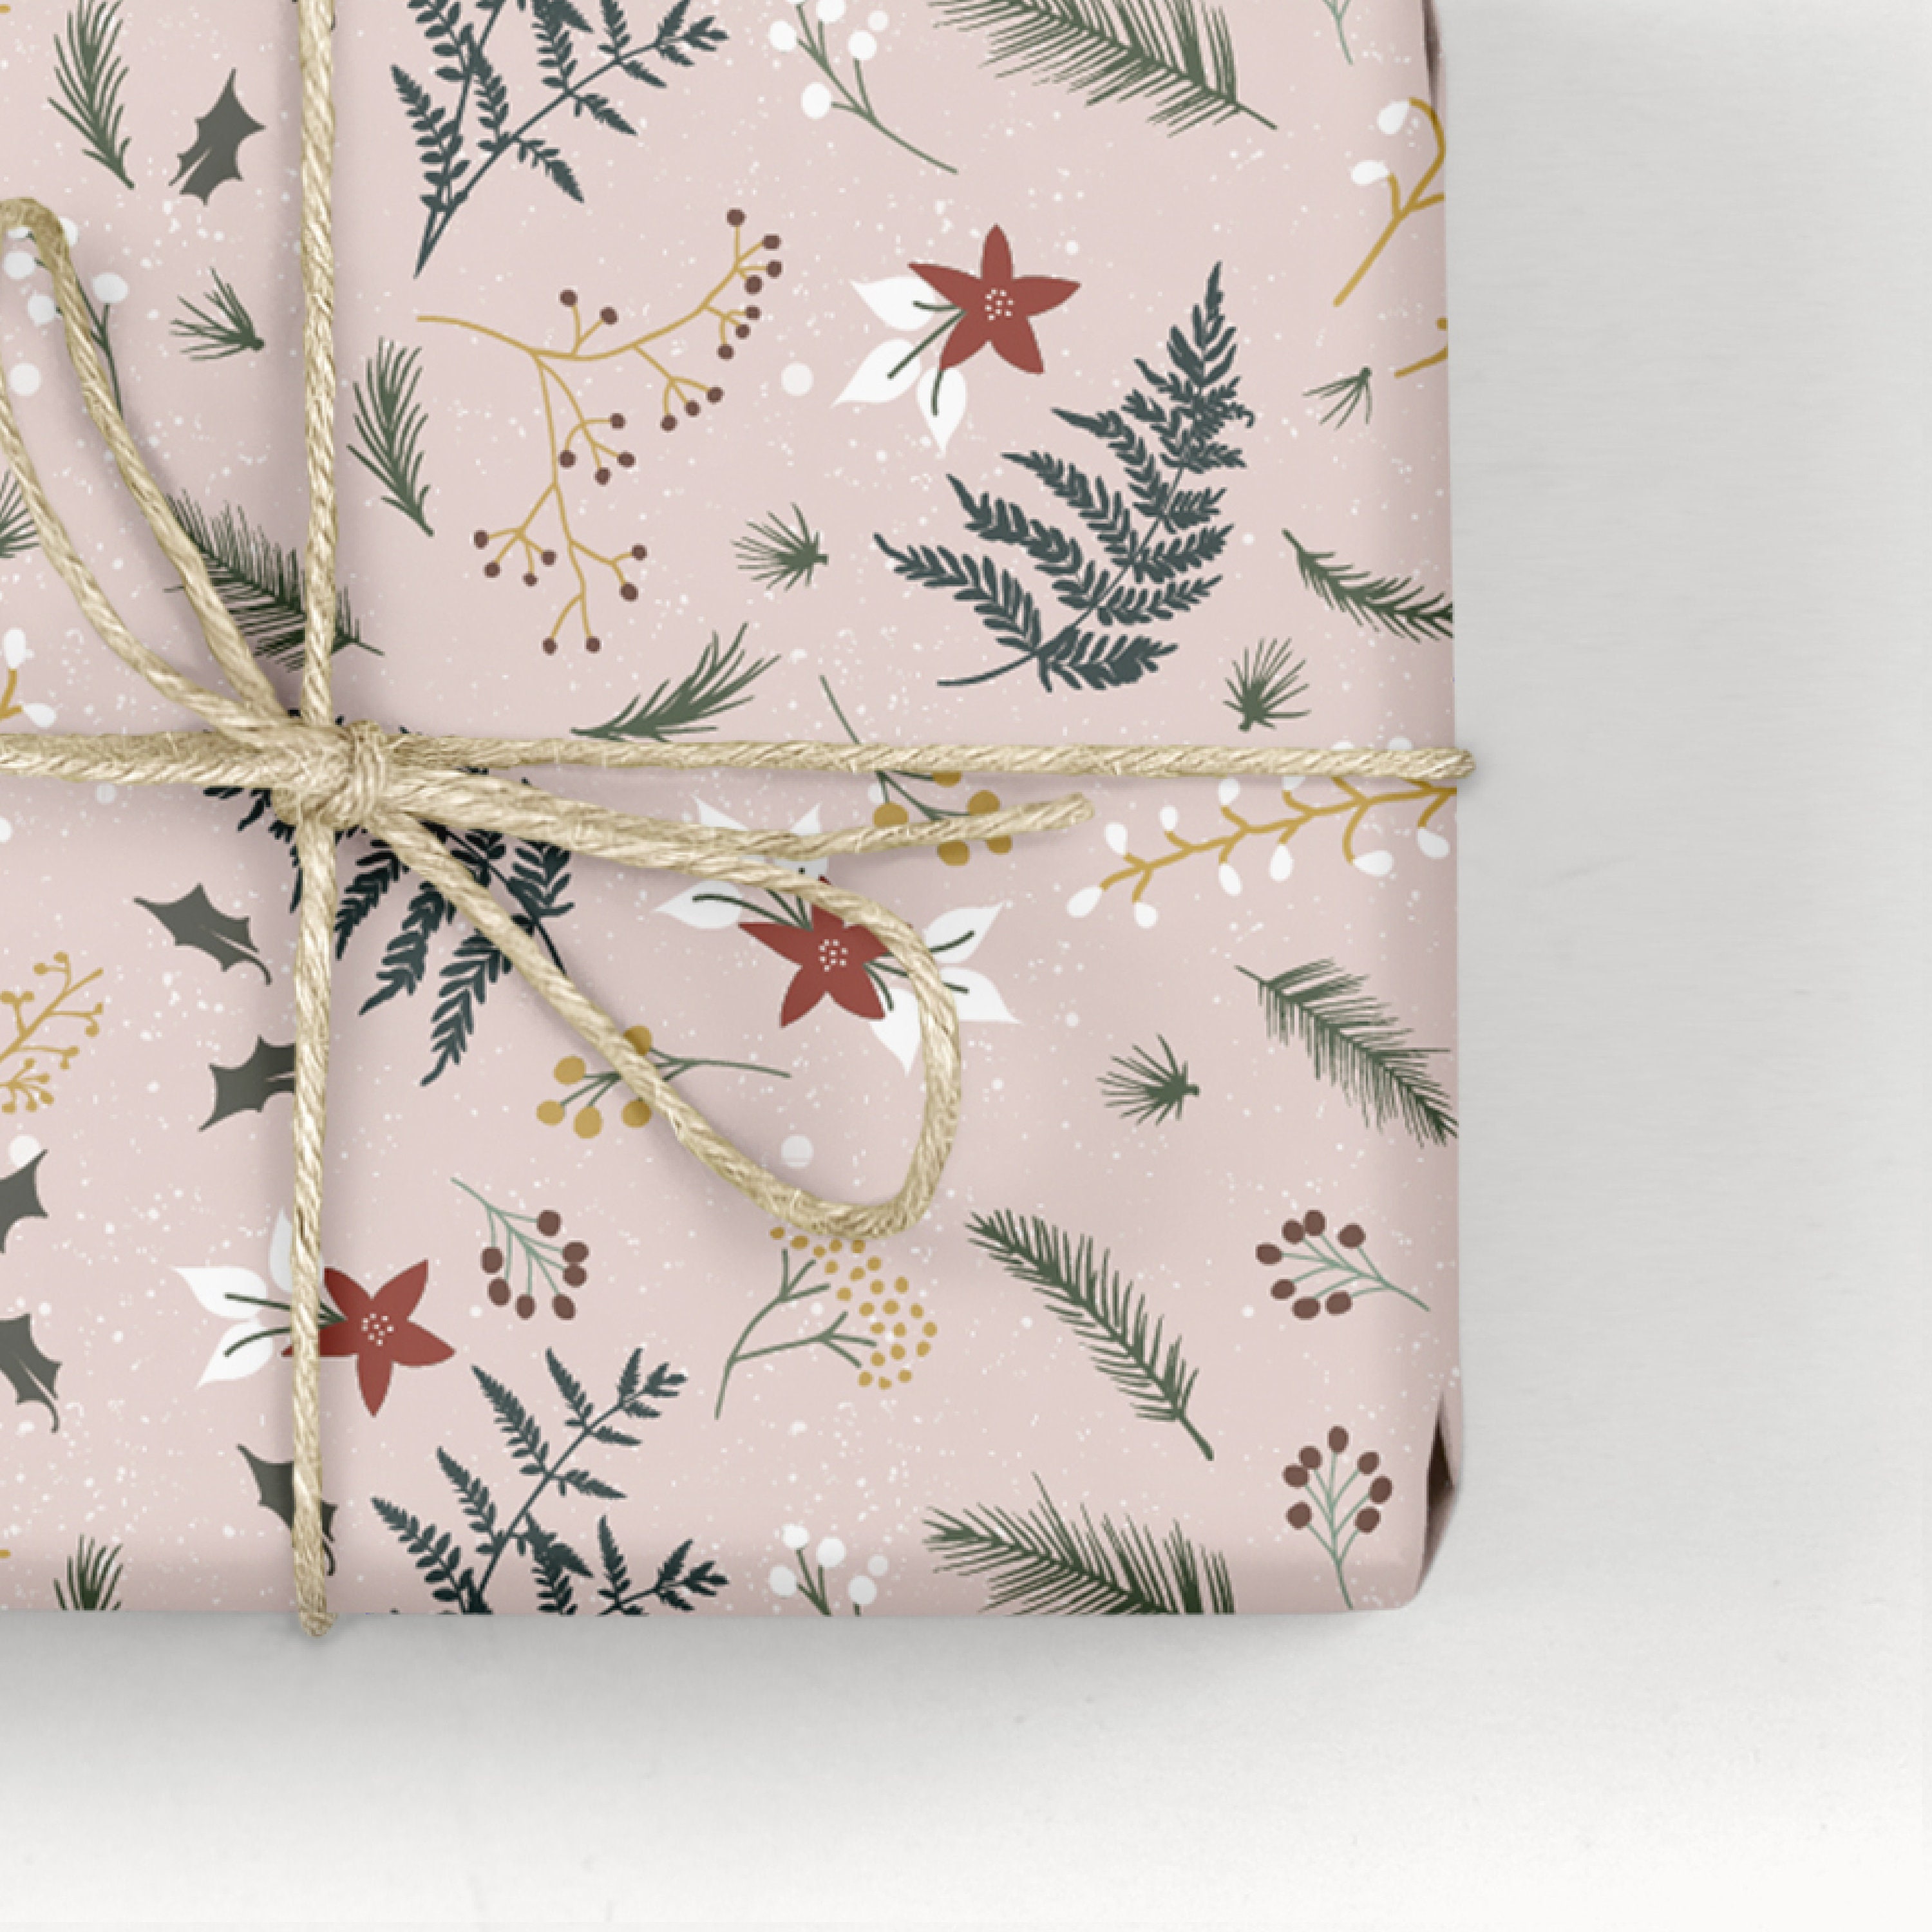 Wrapping Paper / Gift Wrap White Star 